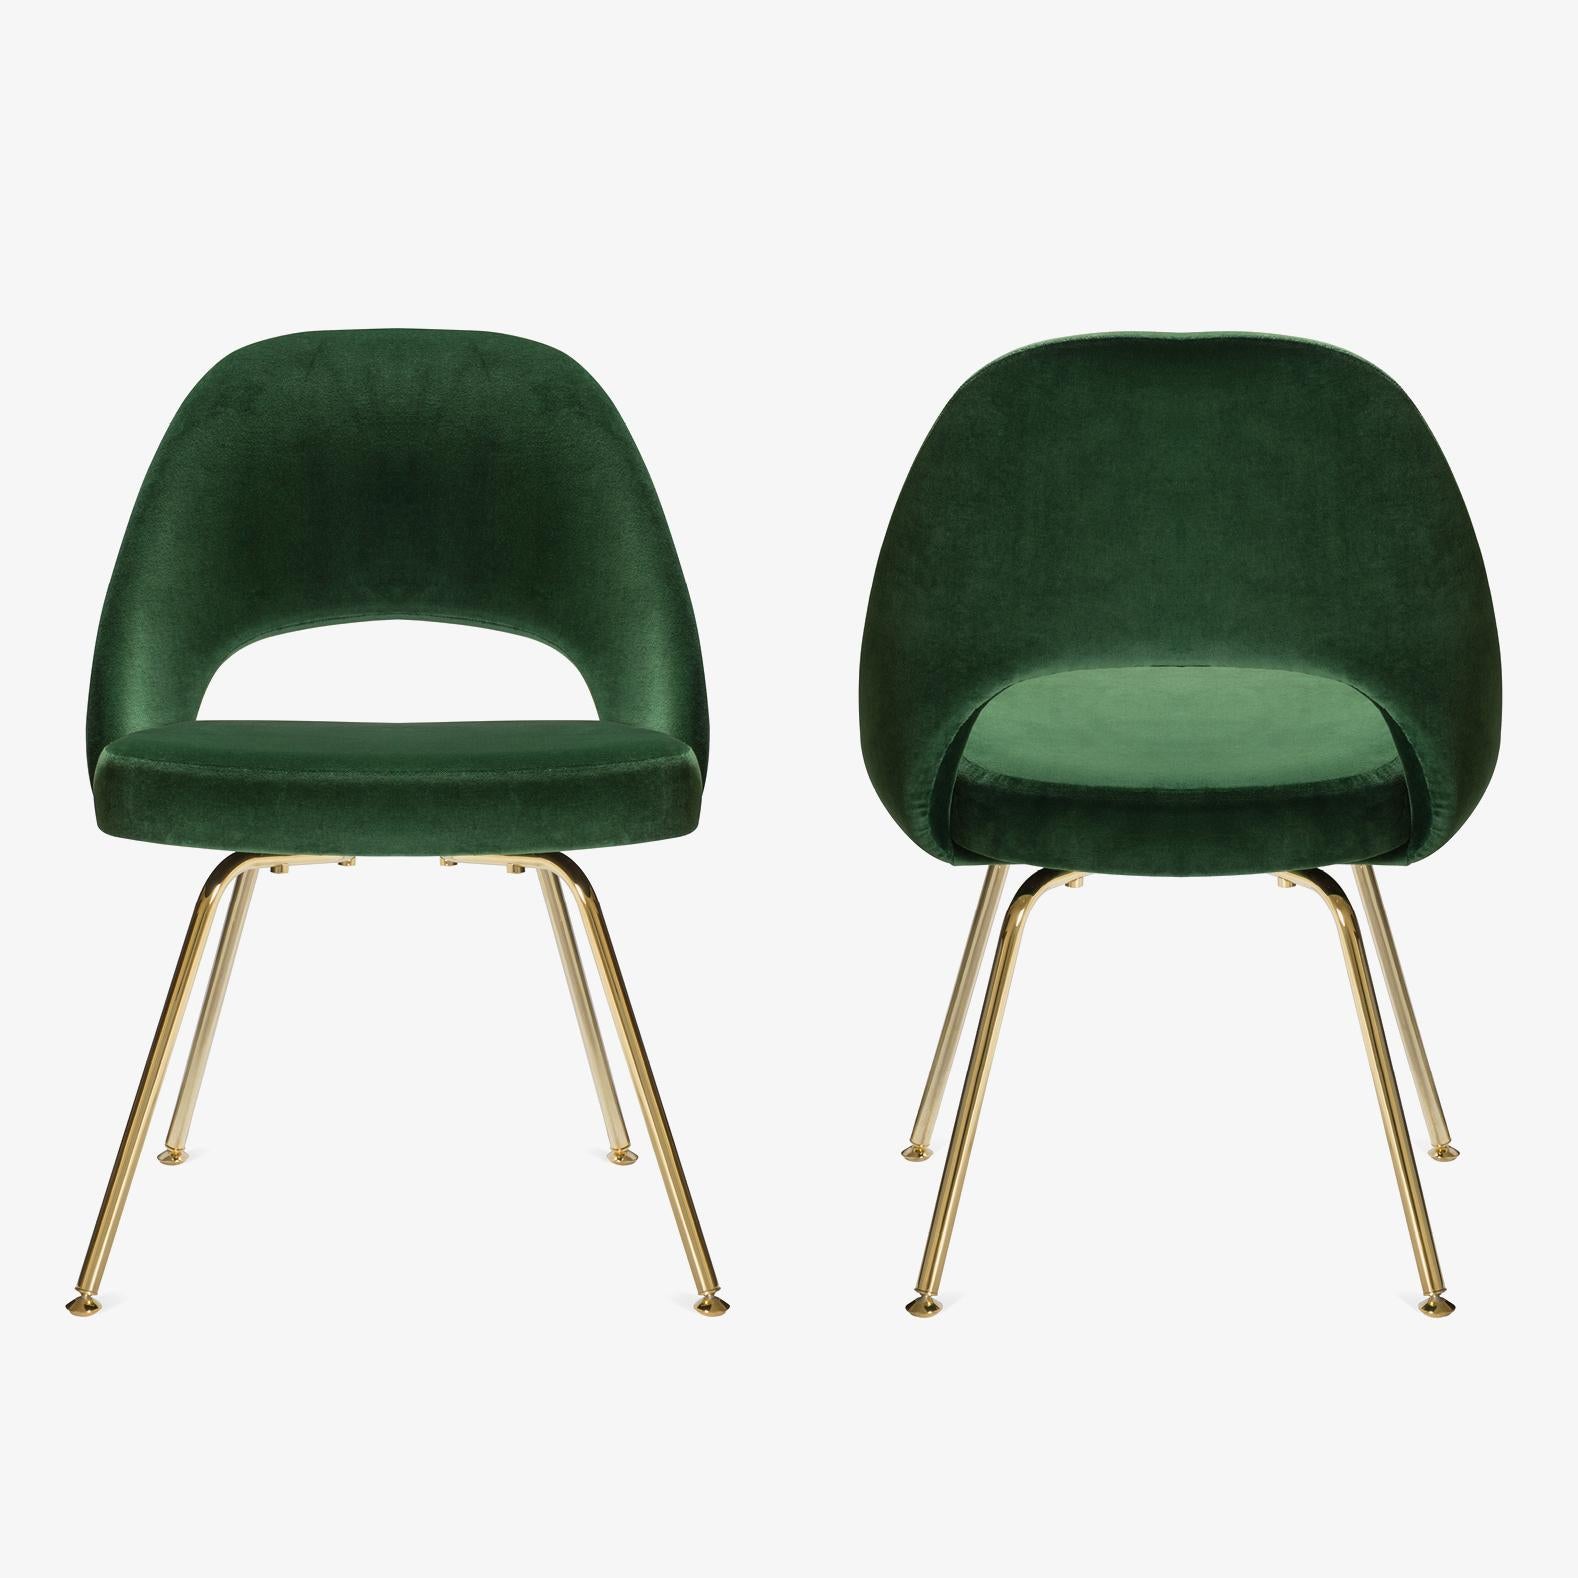 Plated Saarinen Executive Armless Chair in Emerald Velvet, Gold Edition For Sale